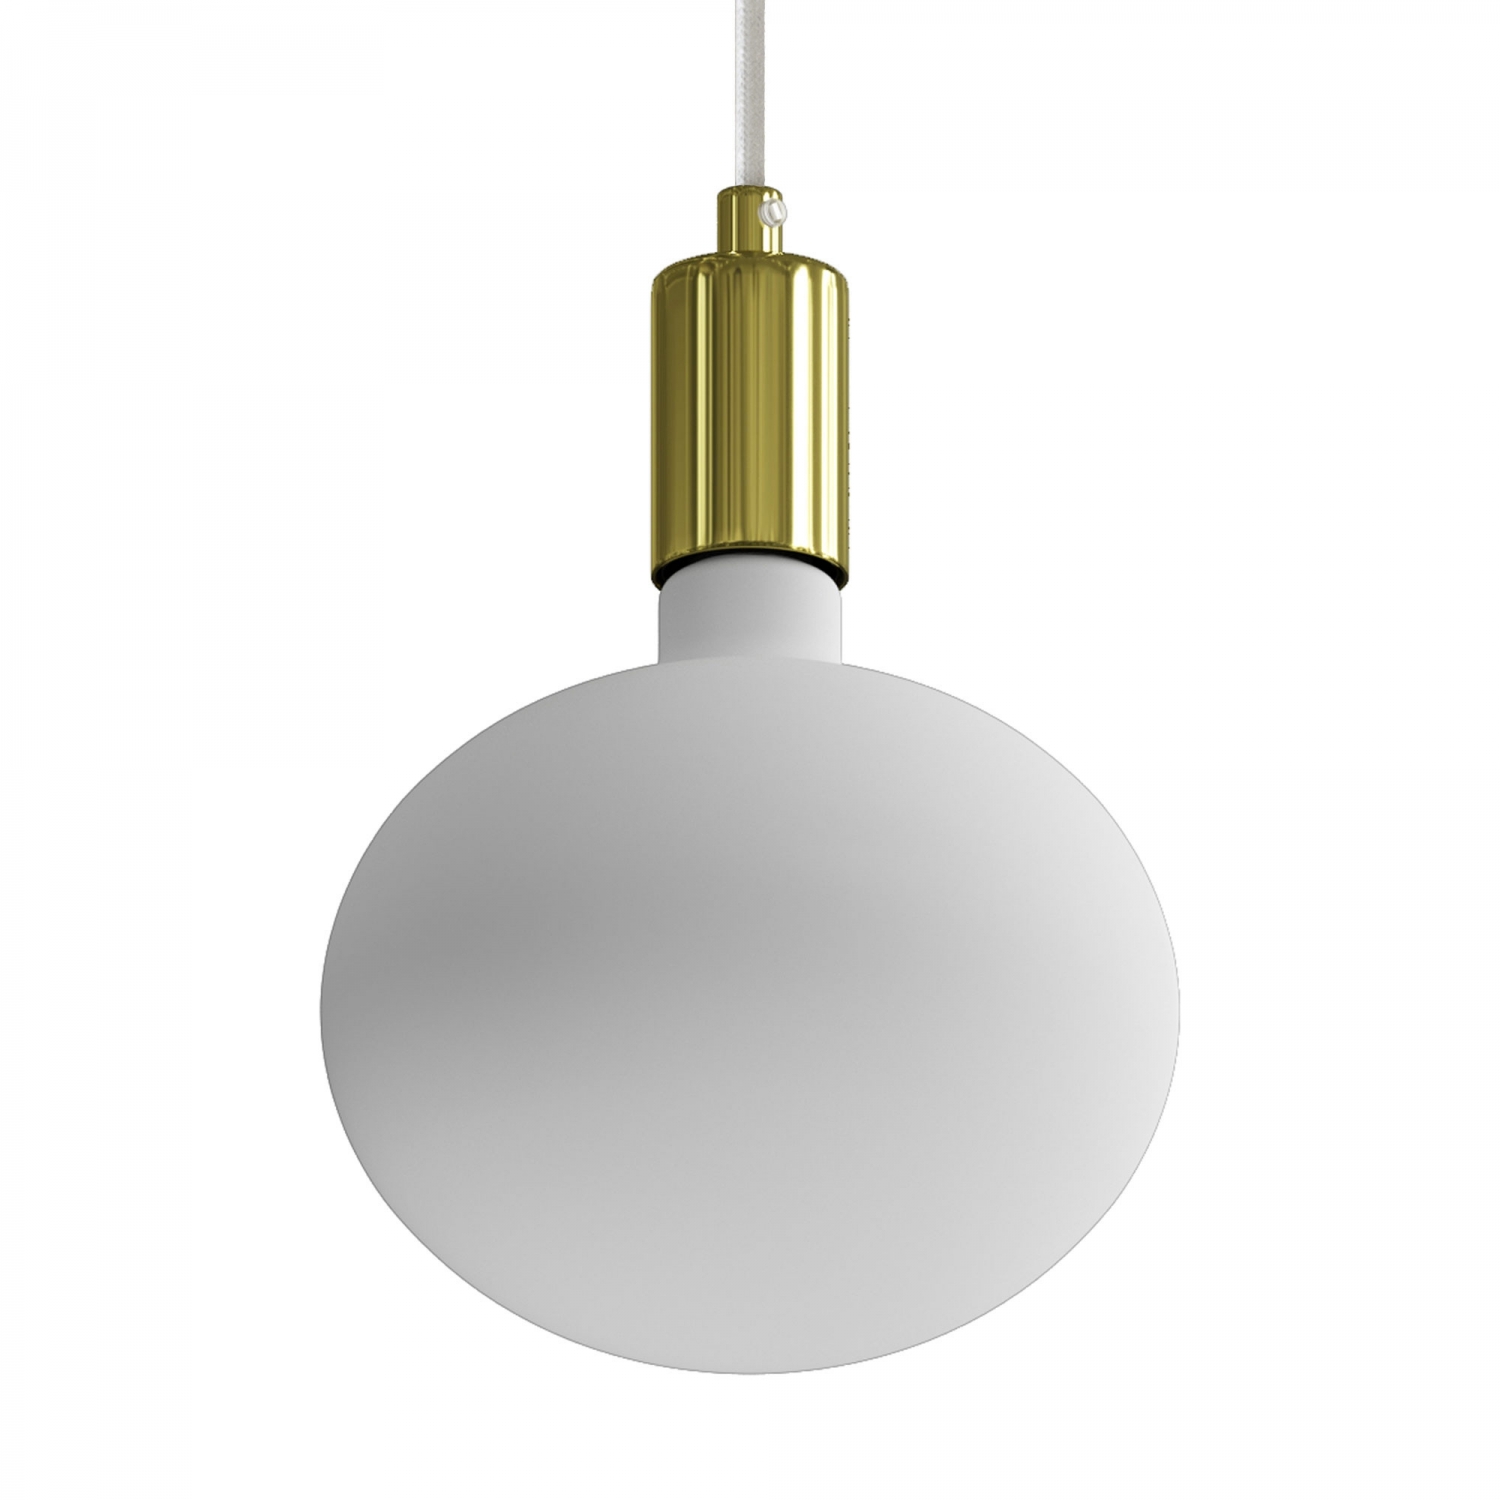 Pendant lamp with textile cable and contrasting metal details